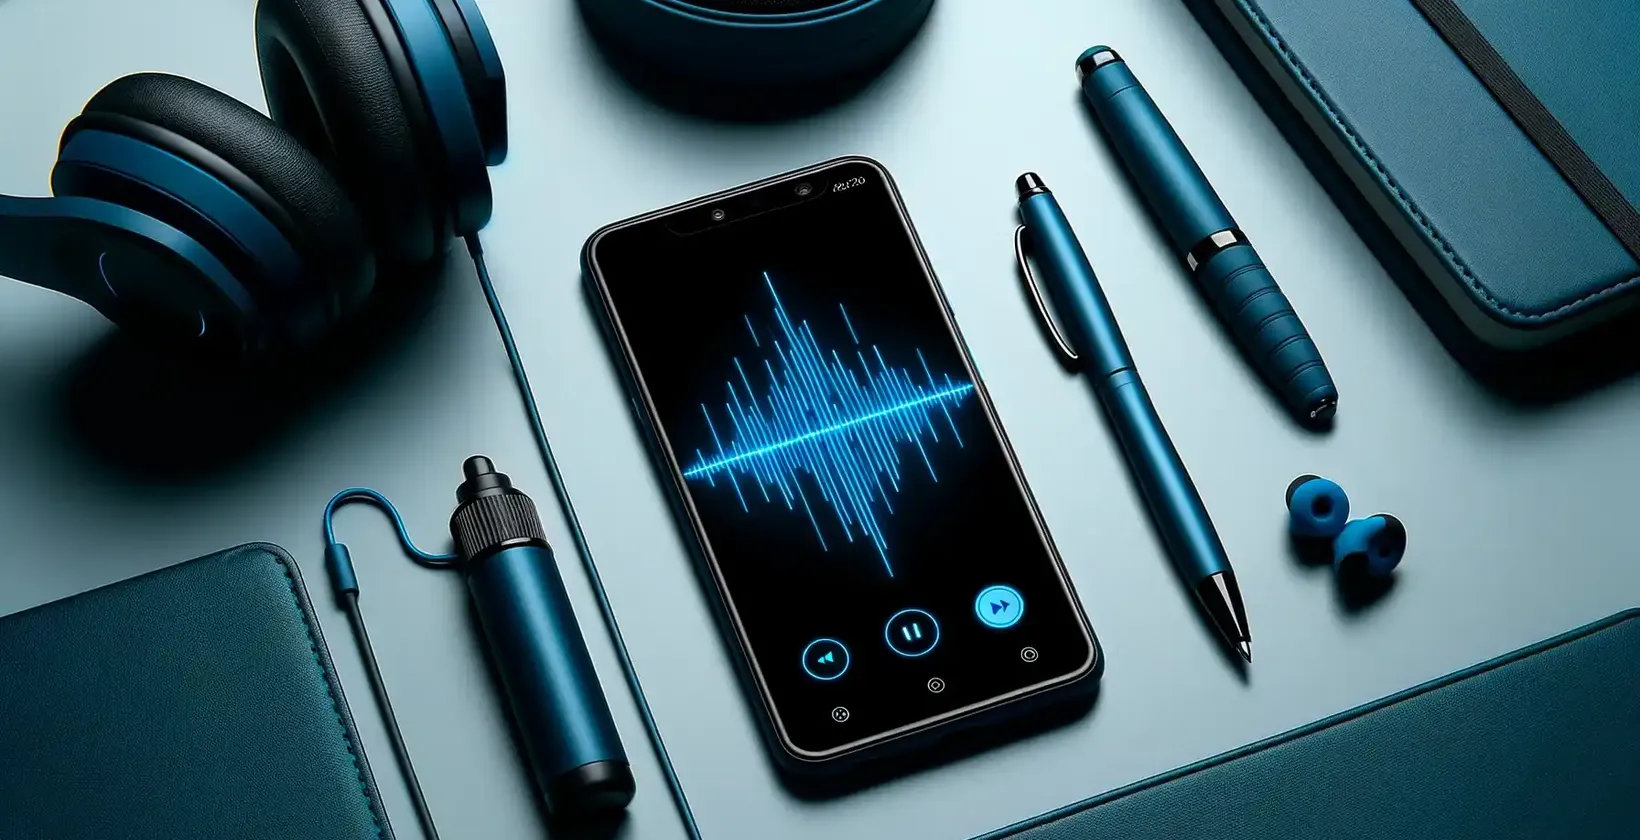 Smartphone with sound waves, headphones, and tools representing a transcription app.